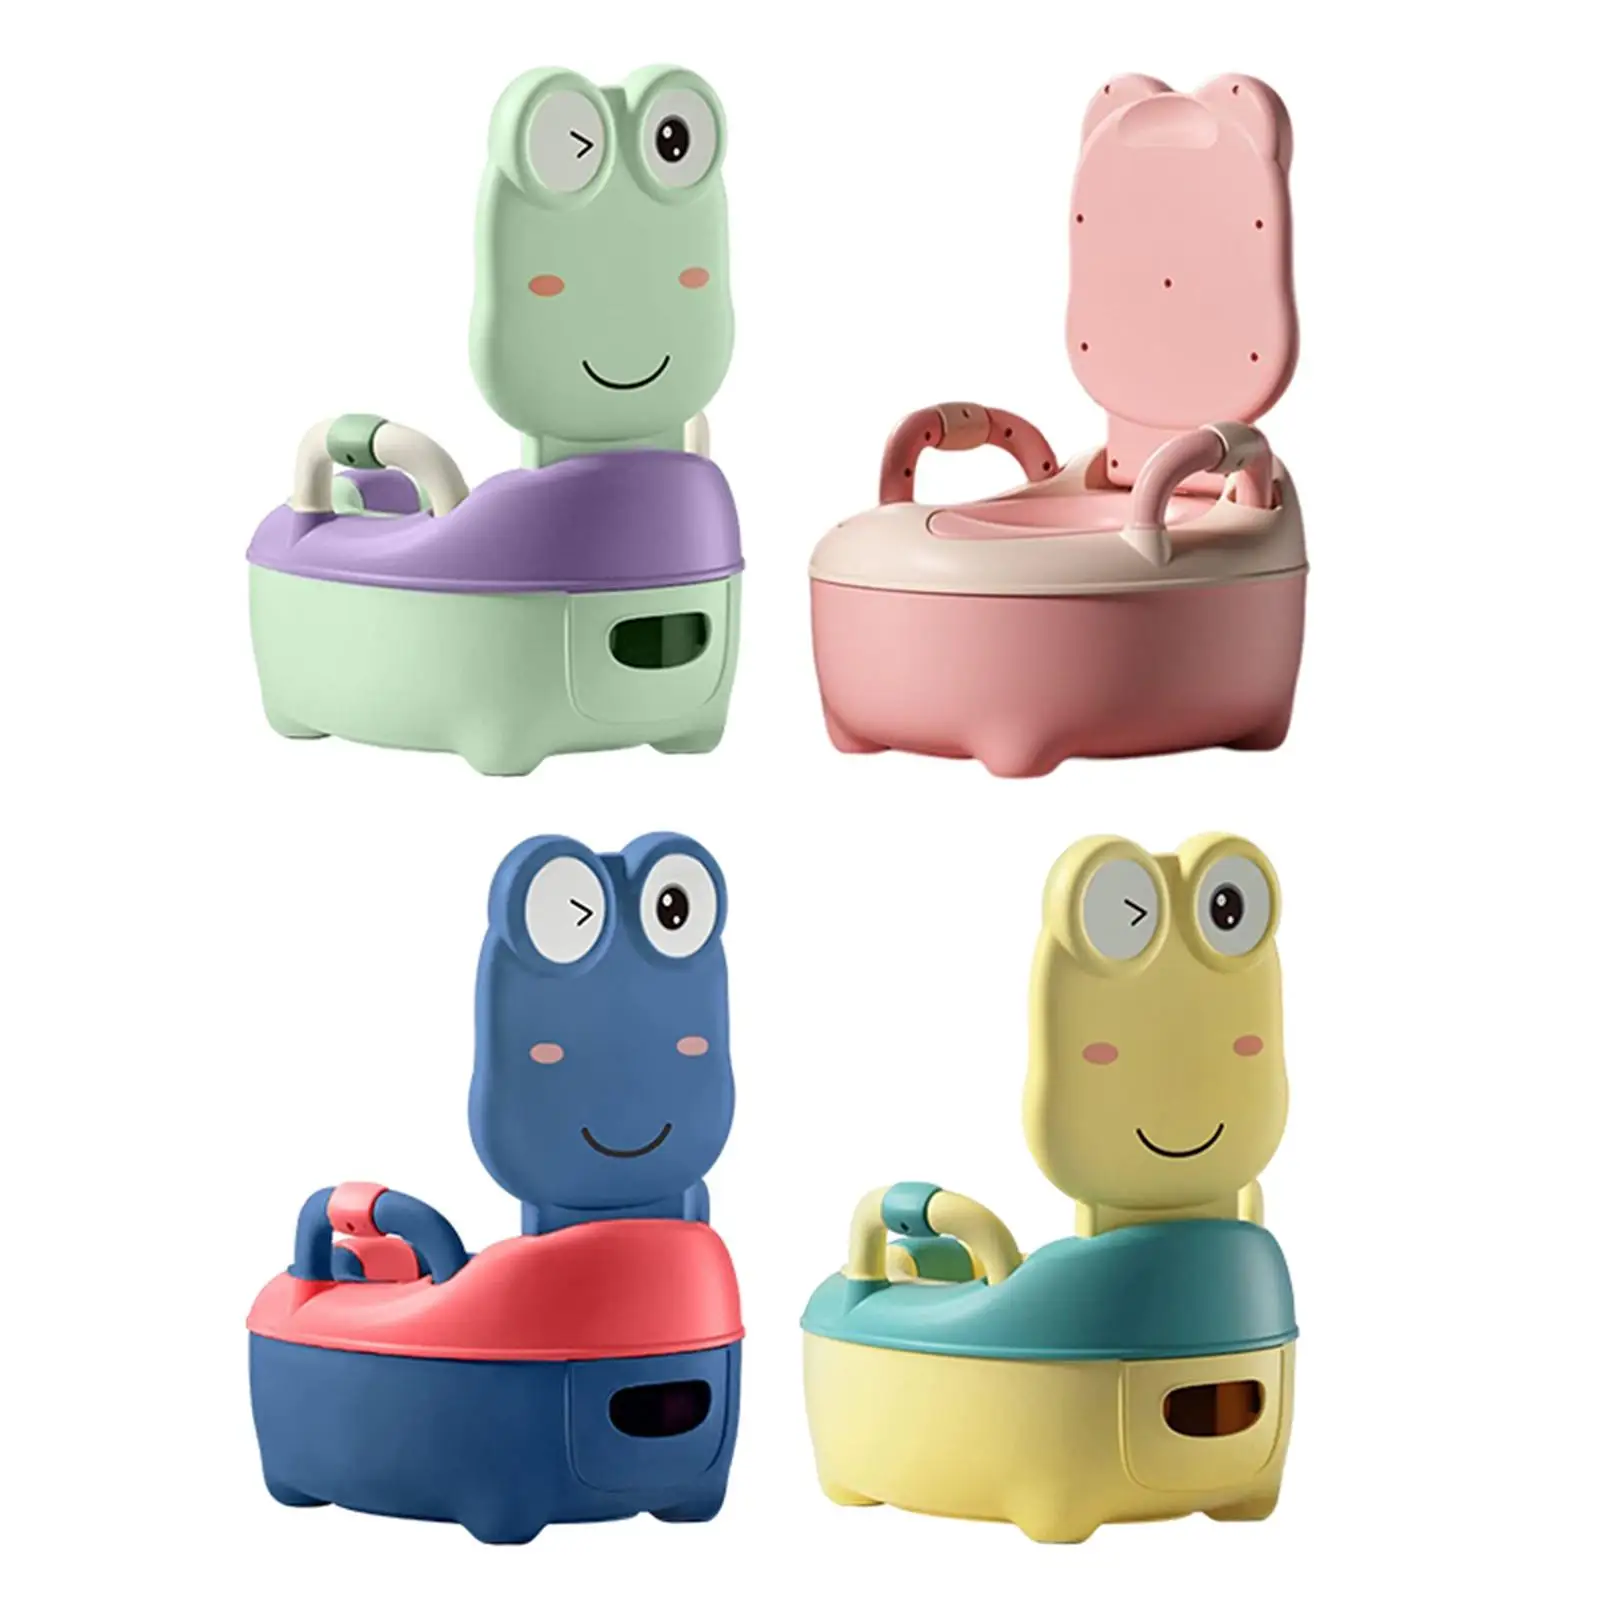 baby Toilet Seat Potty Stool Removable Container Pot for Unisex Child